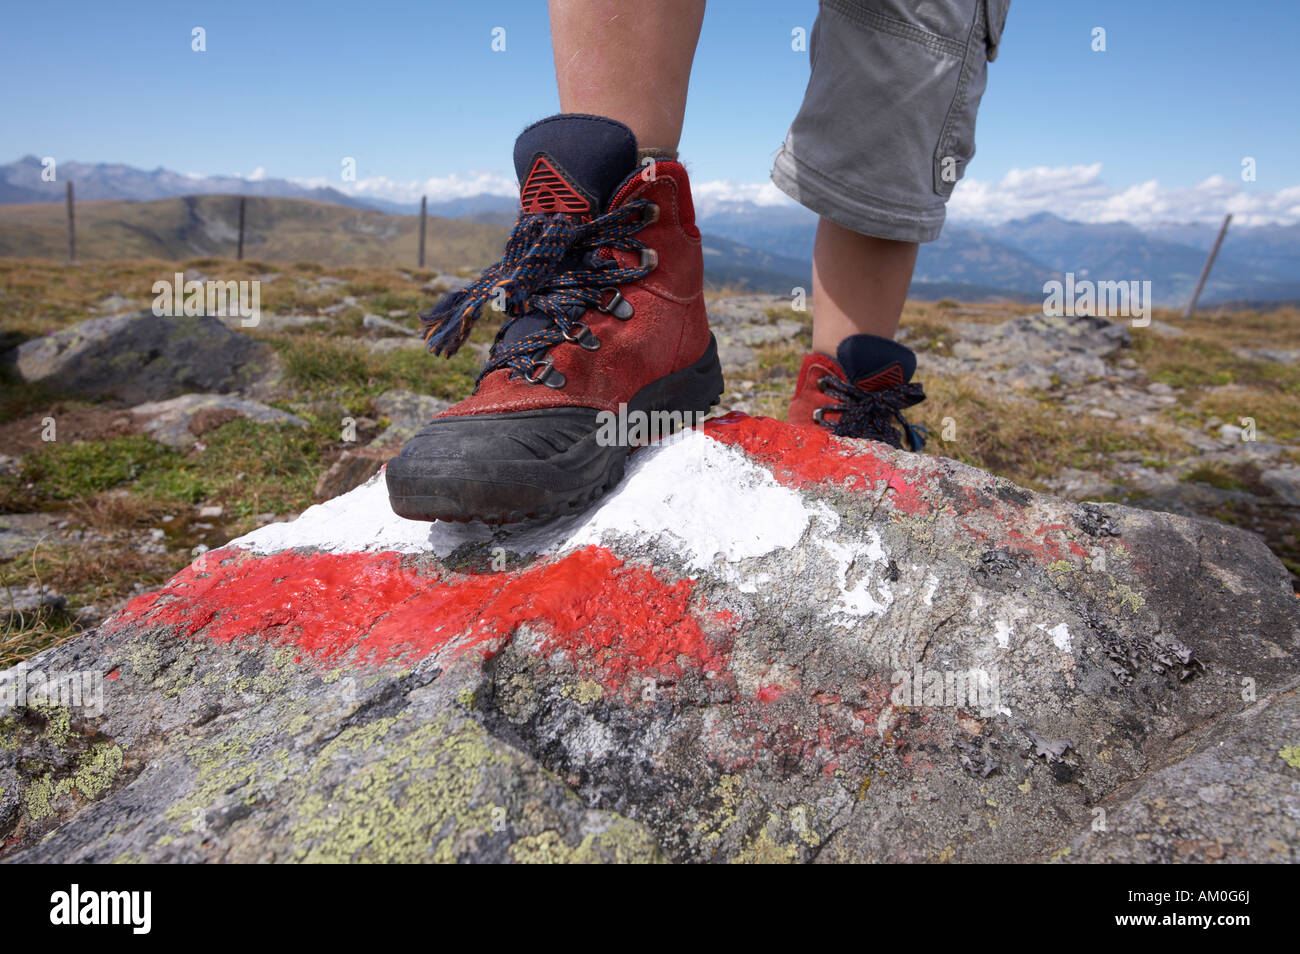 Foot of a child on a stone with red and white marking Stock Photo